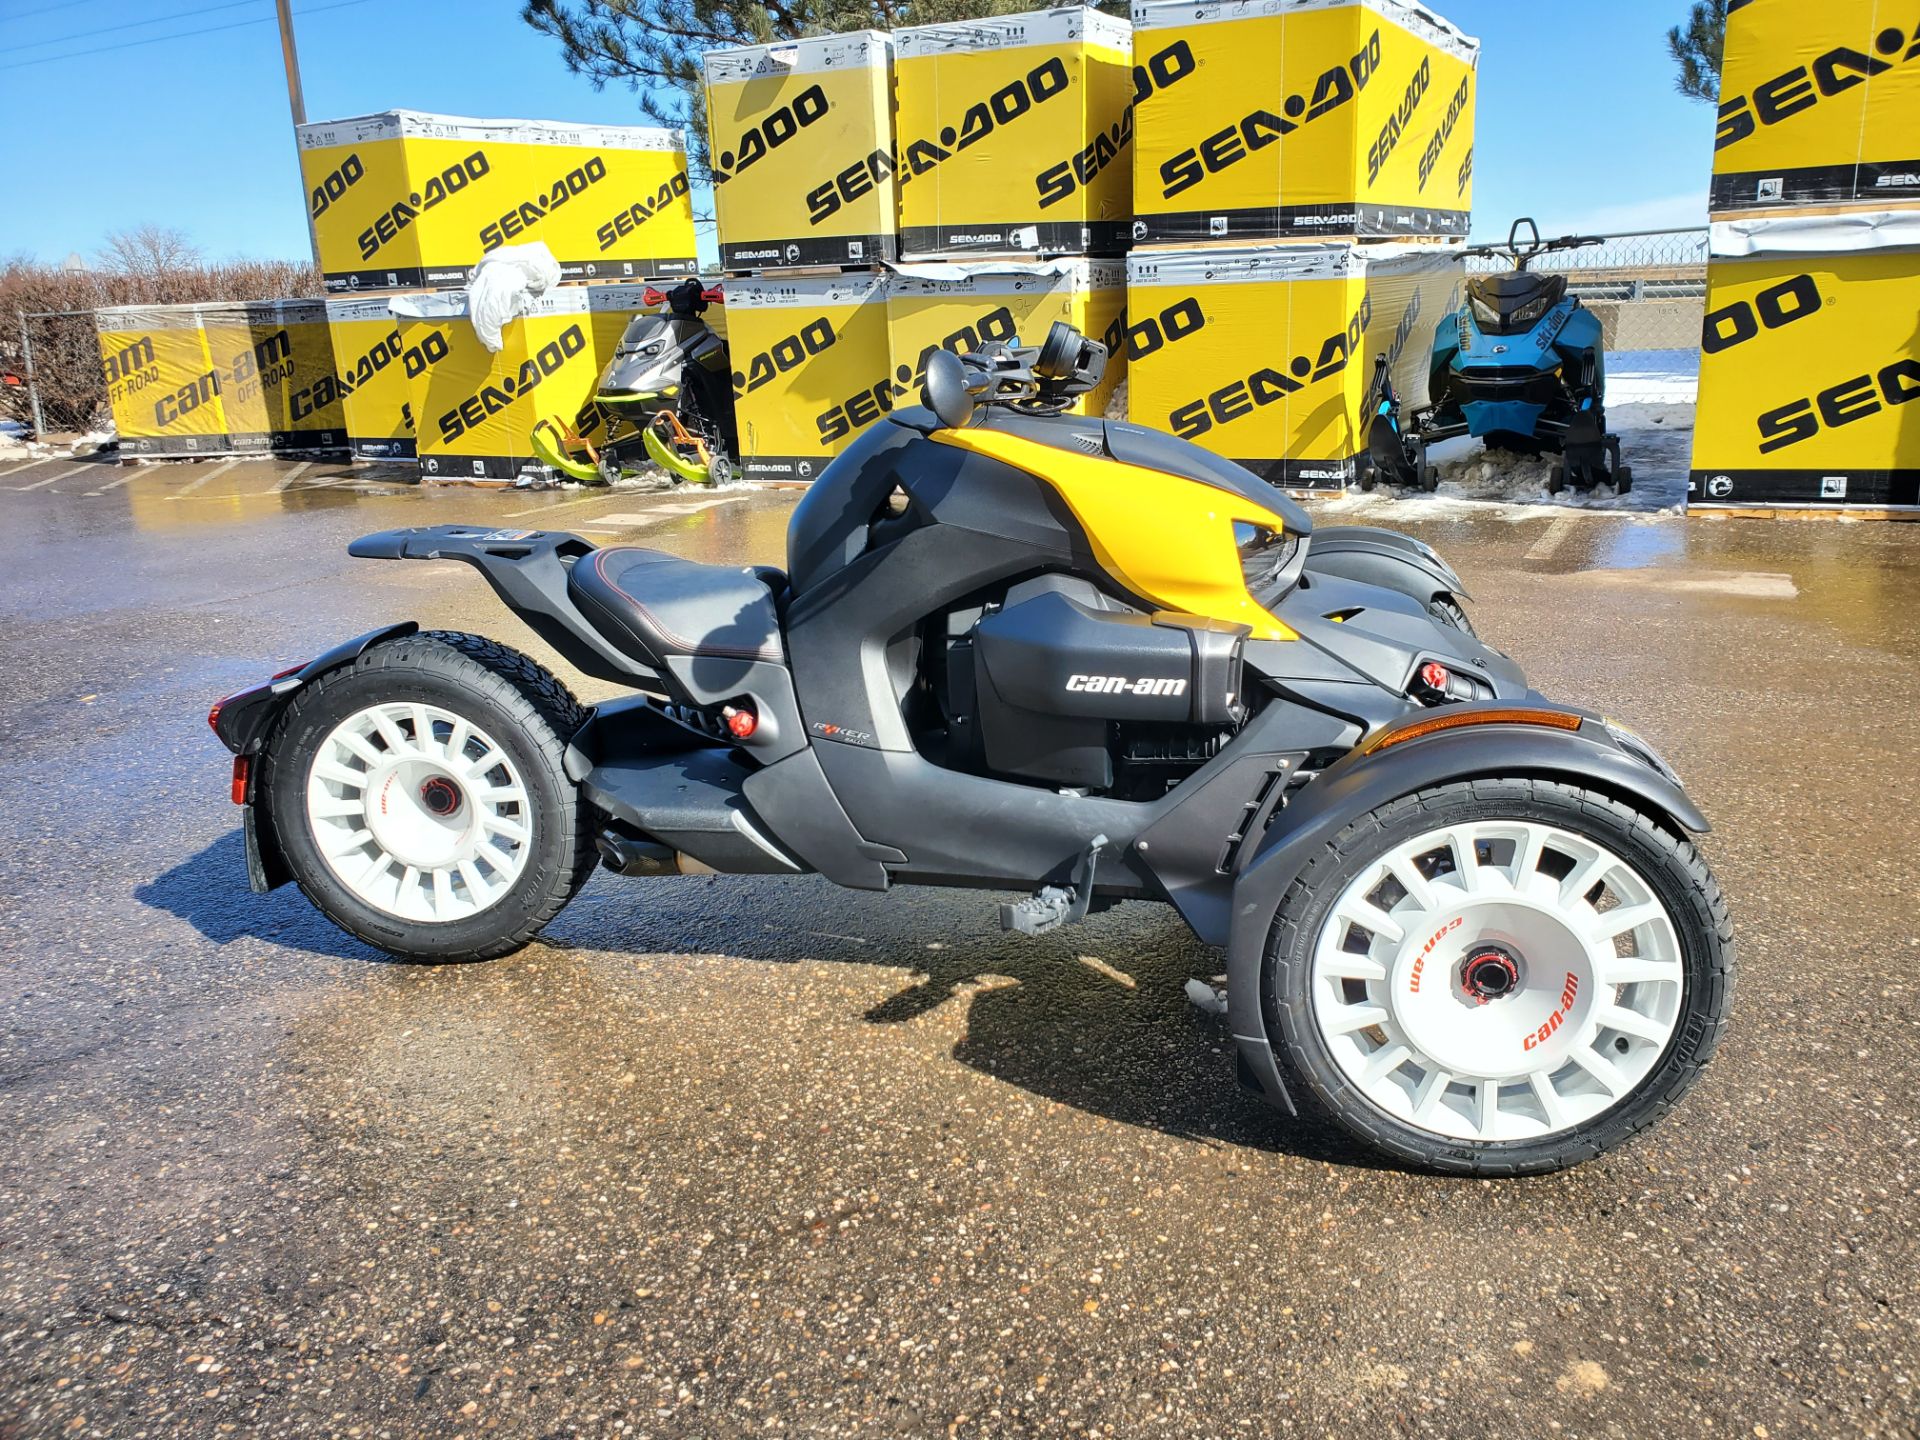 2022 Can-Am Ryker Sport in Fort Collins, Colorado - Photo 1